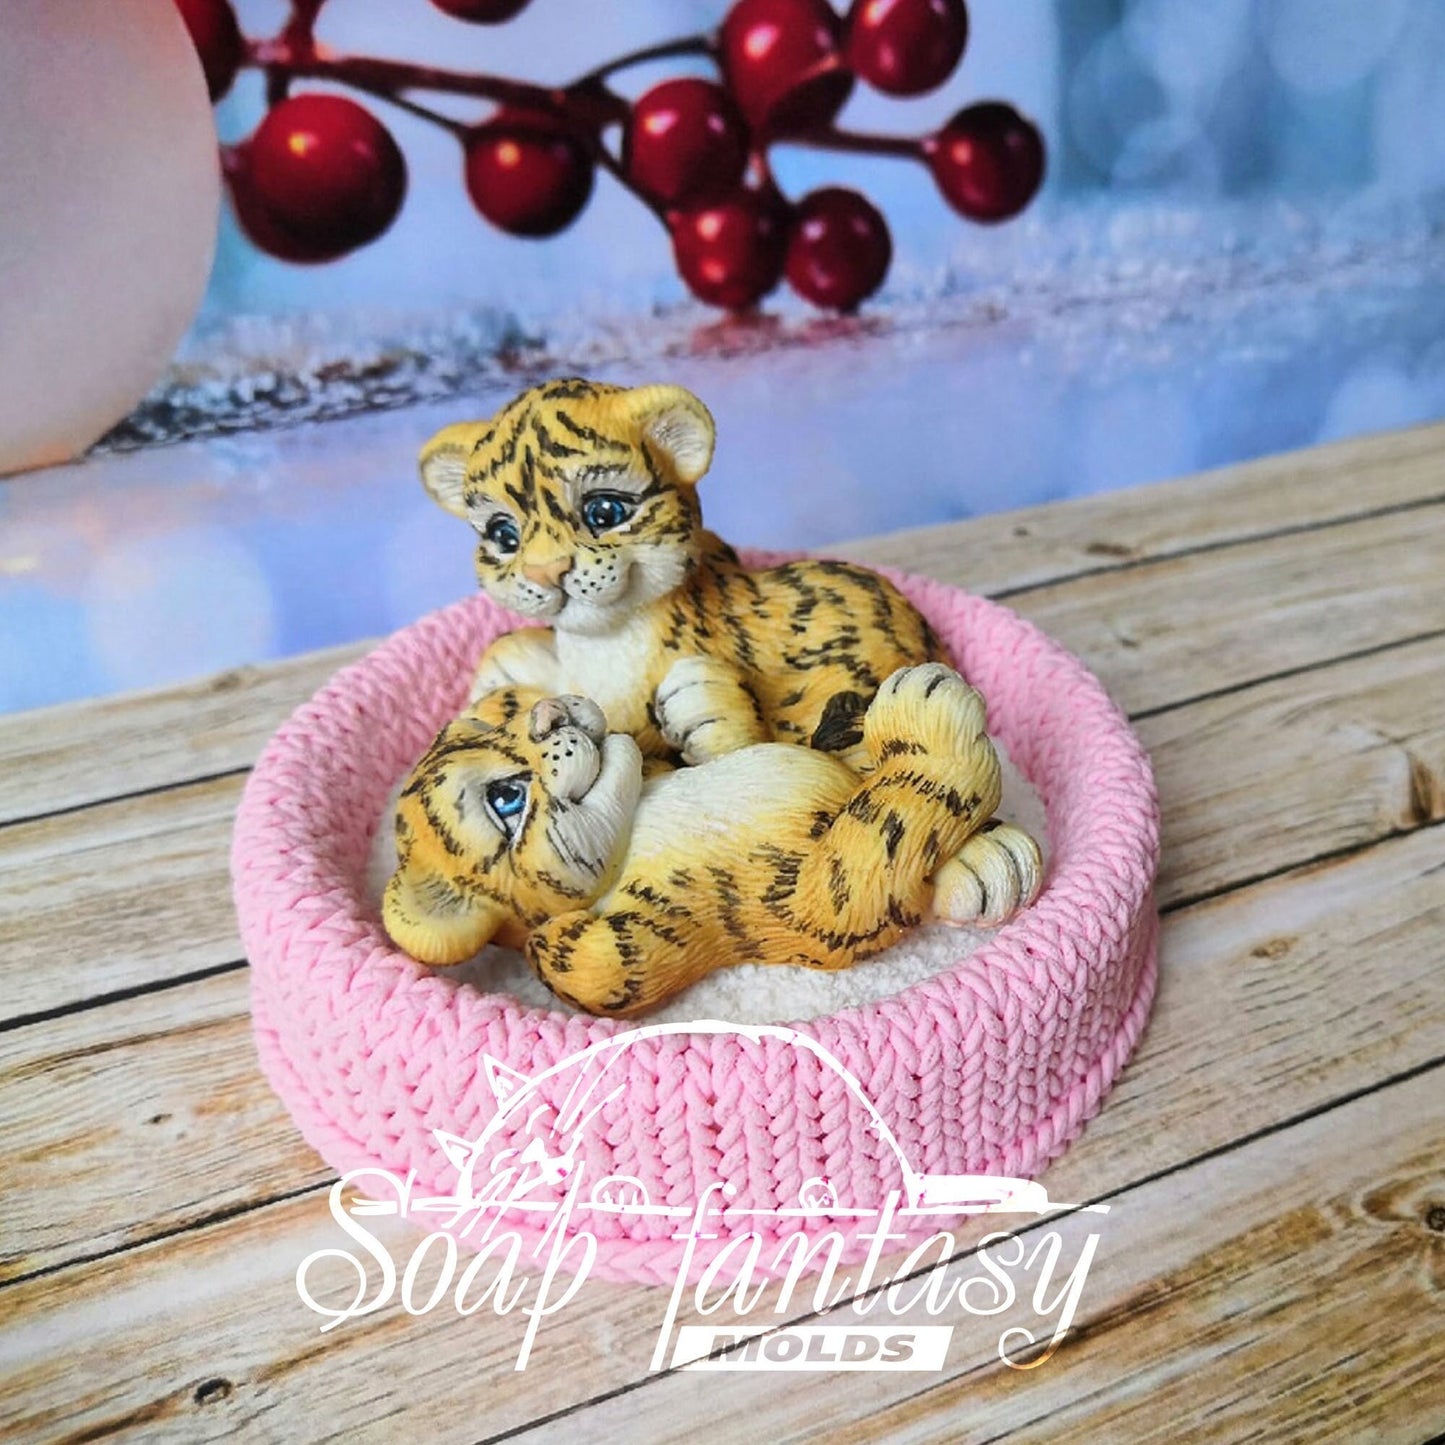 So cute tiger baby cub lying on its tummy silicone mold for soap making